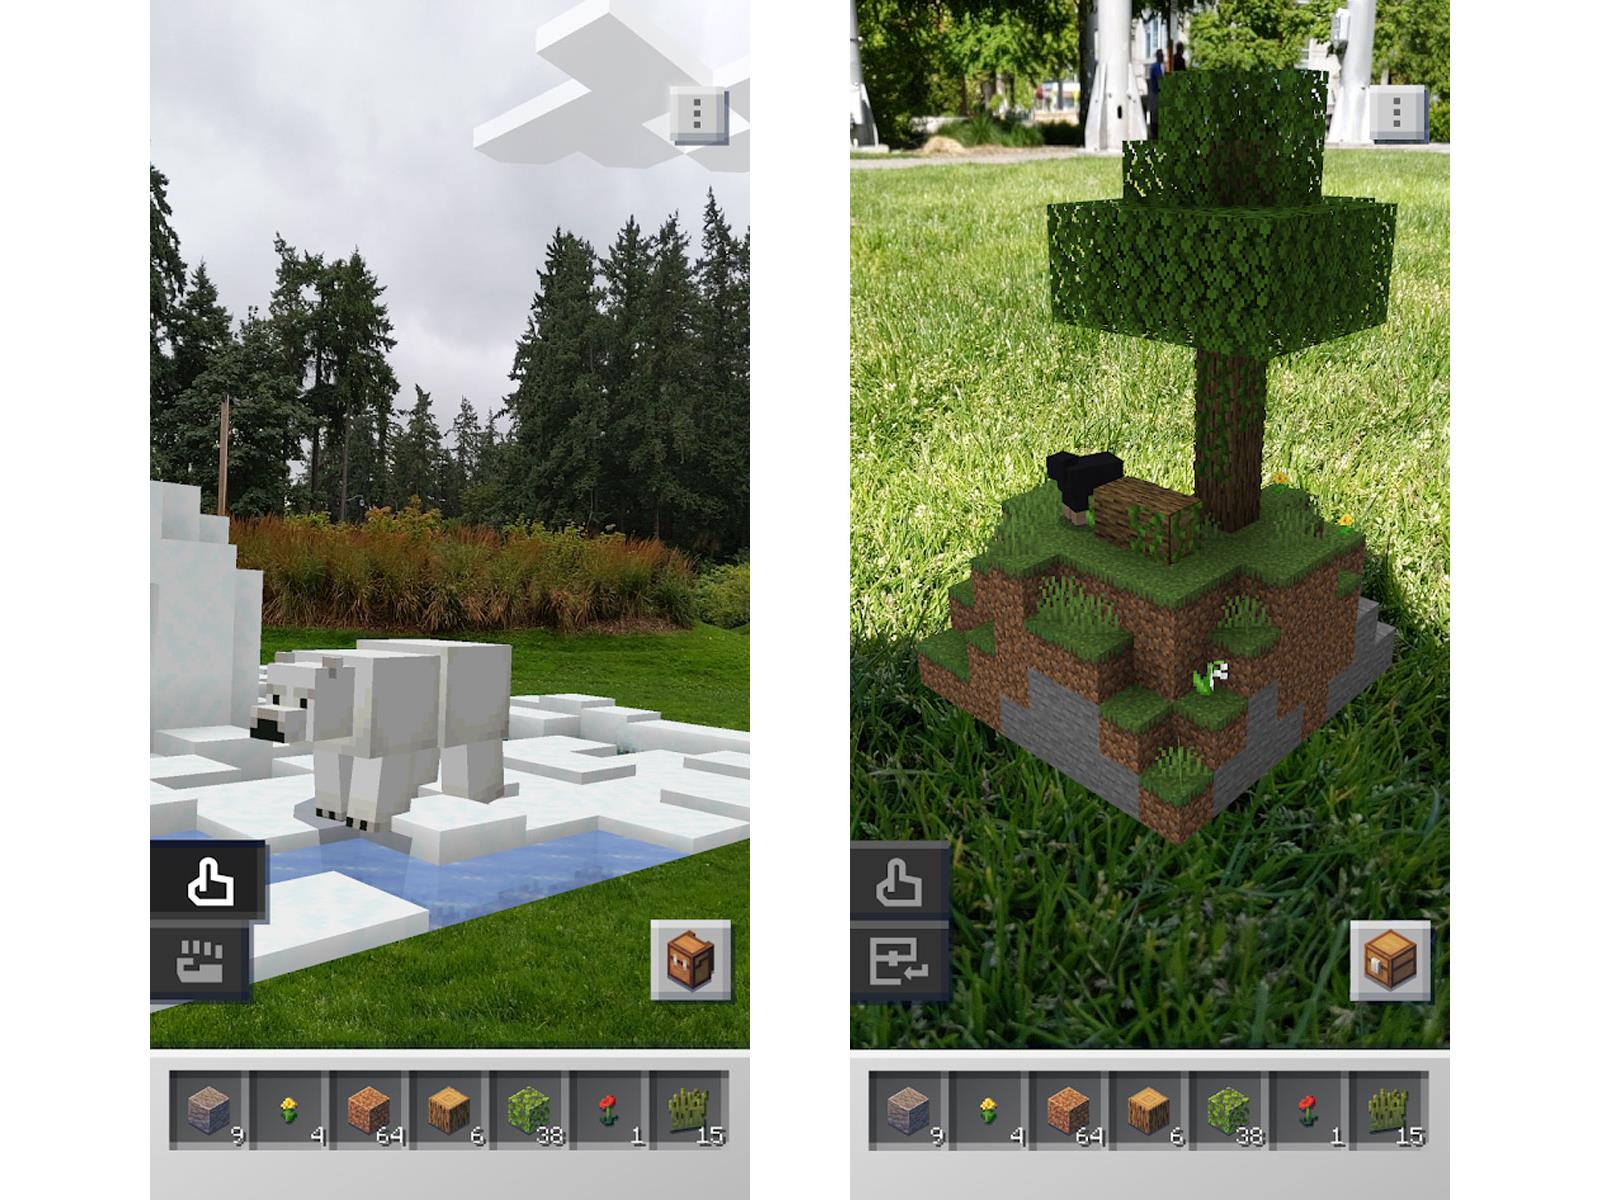 Minecraft Earth' Beta is Available on Android by bitcoincrypto on